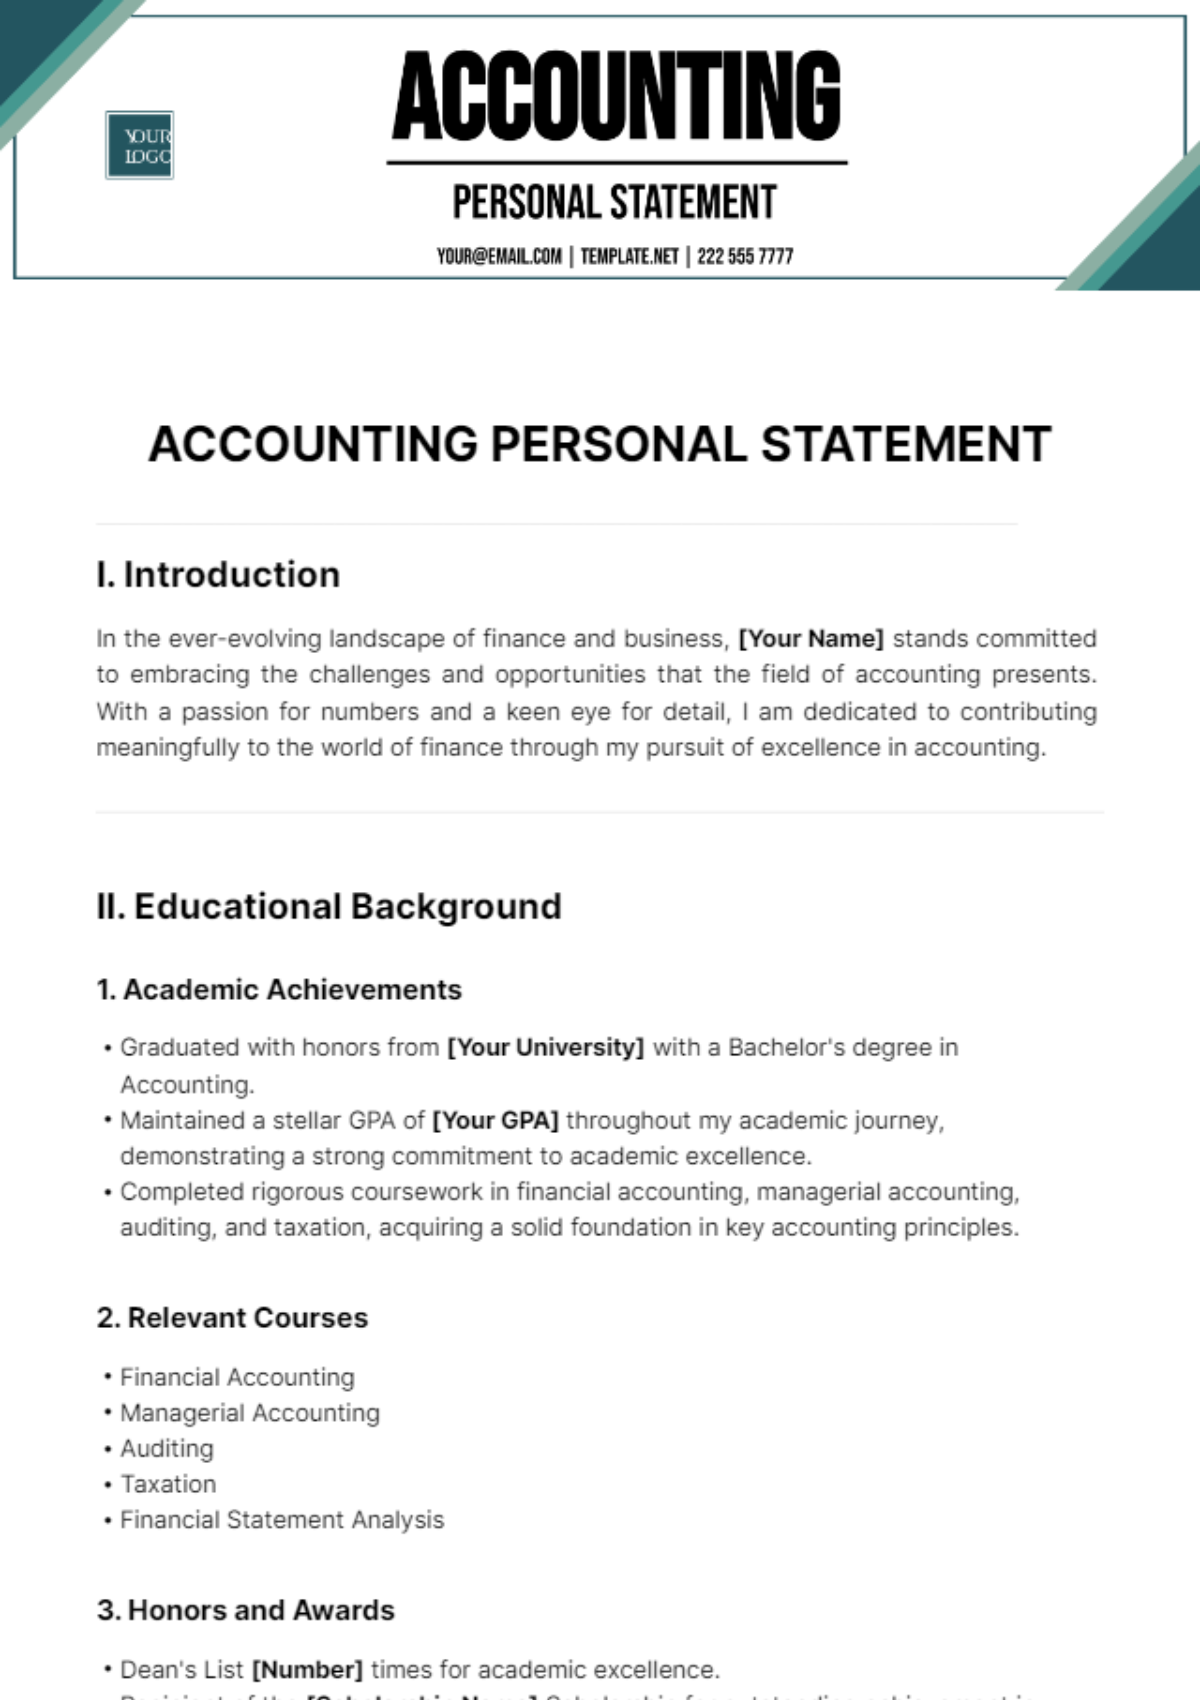 Accounting Personal Statement Template